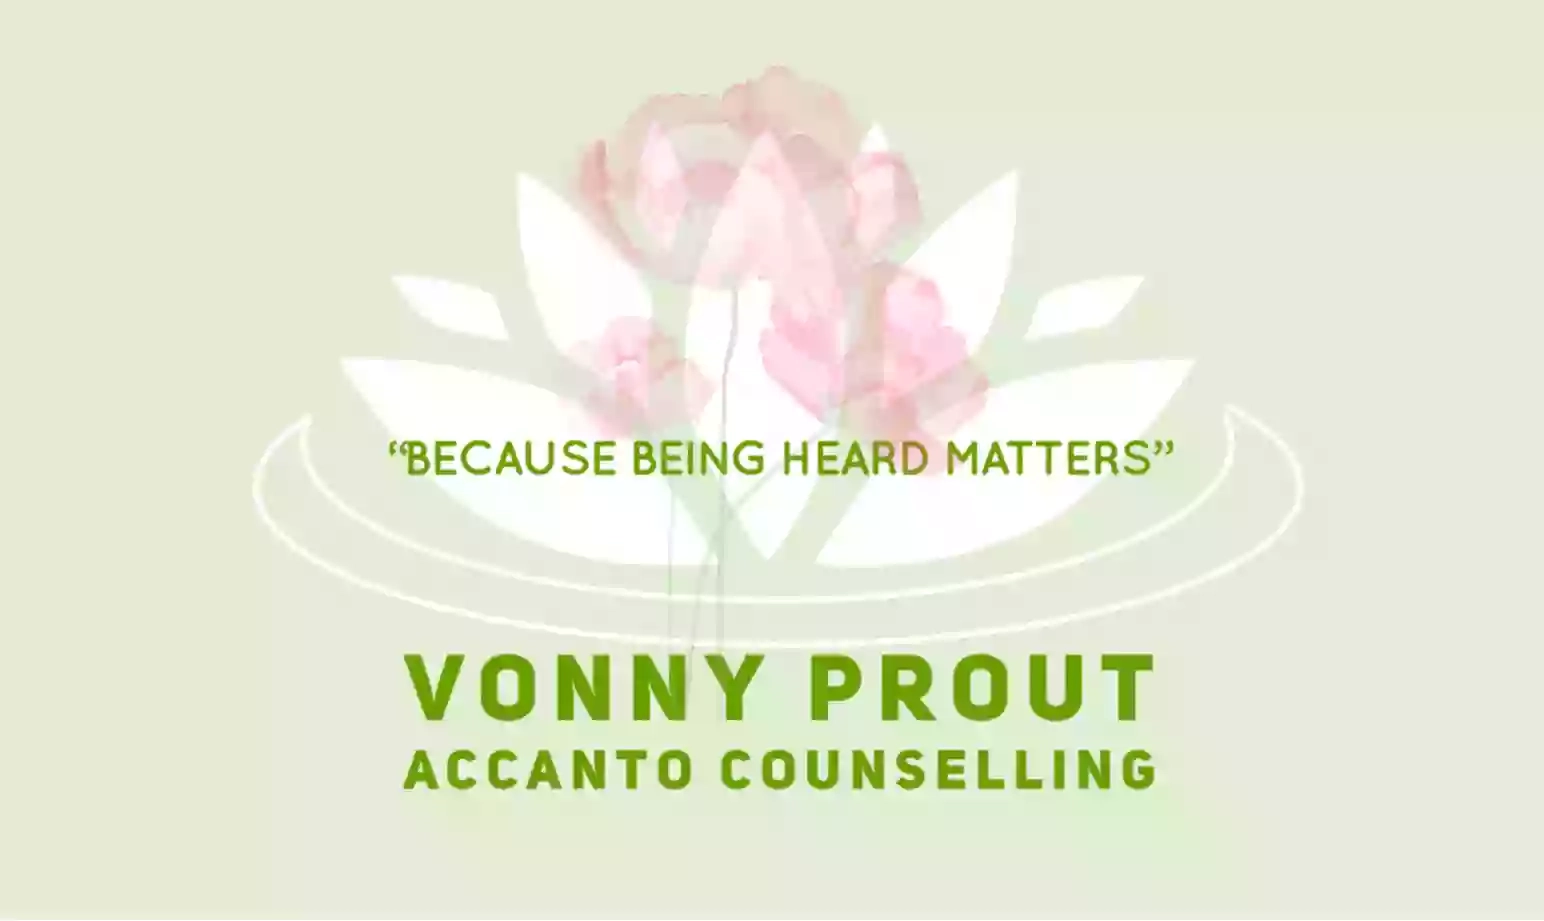 Accanto Counselling